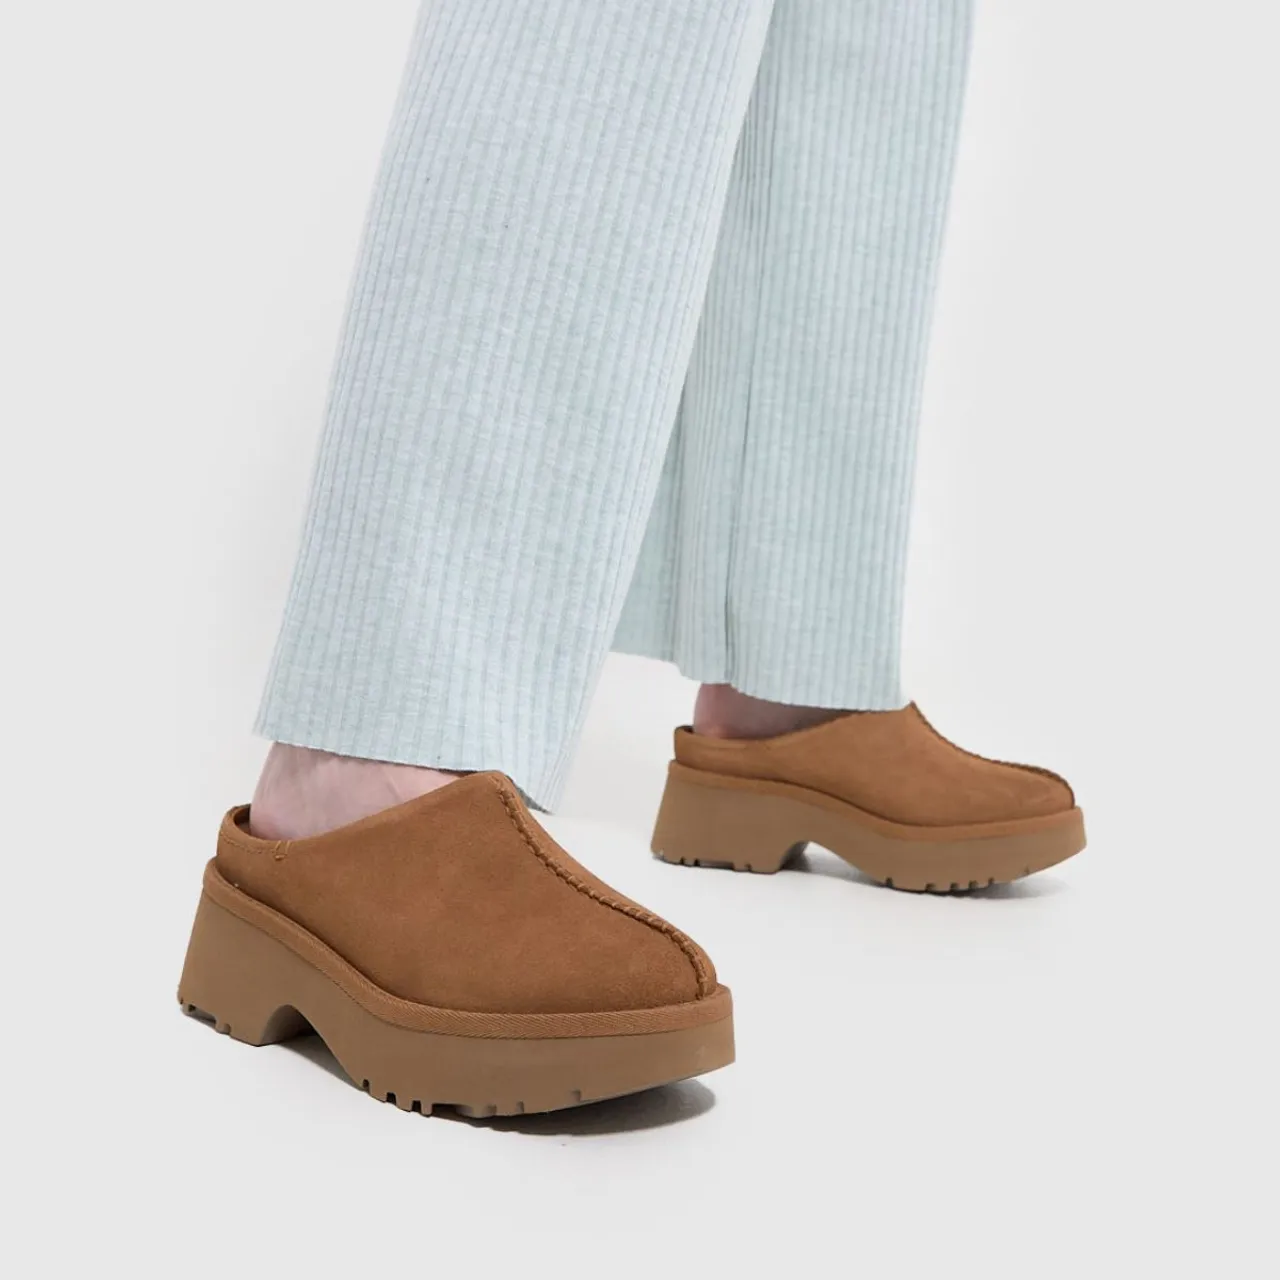 Ugg new Heights Clog Sandals in Chestnut